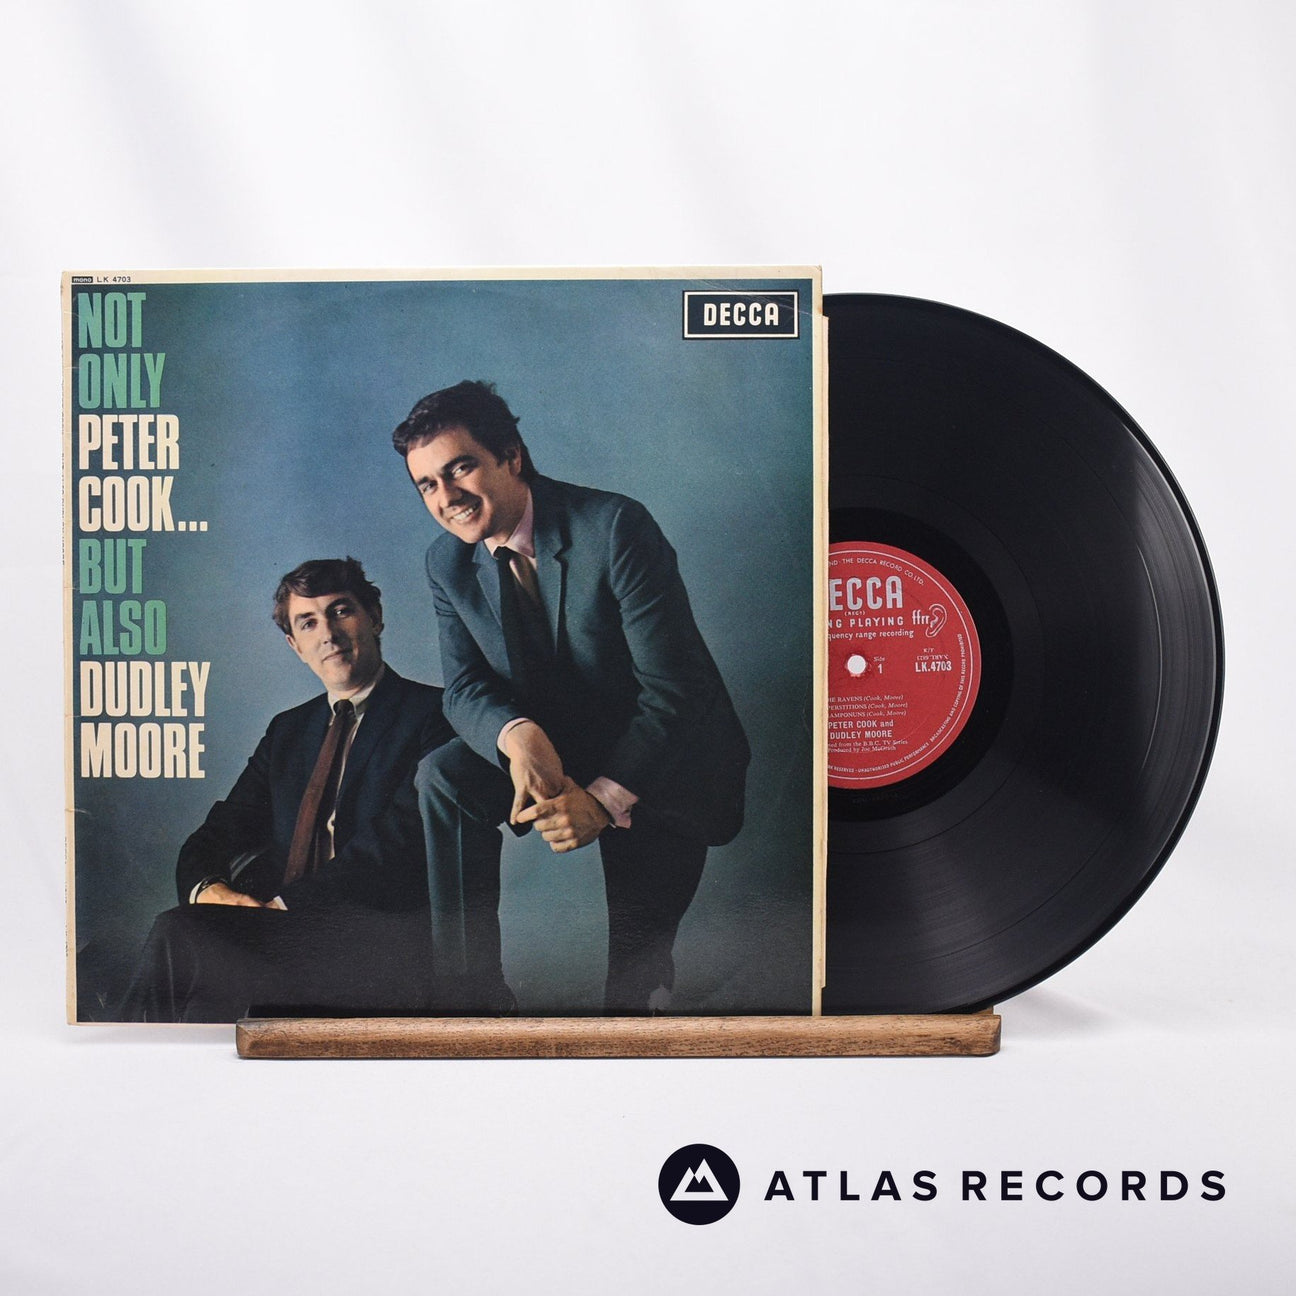 Peter Cook & Dudley Moore Not Only Peter Cook... But Also Dudley Moore LP Vinyl Record - Front Cover & Record